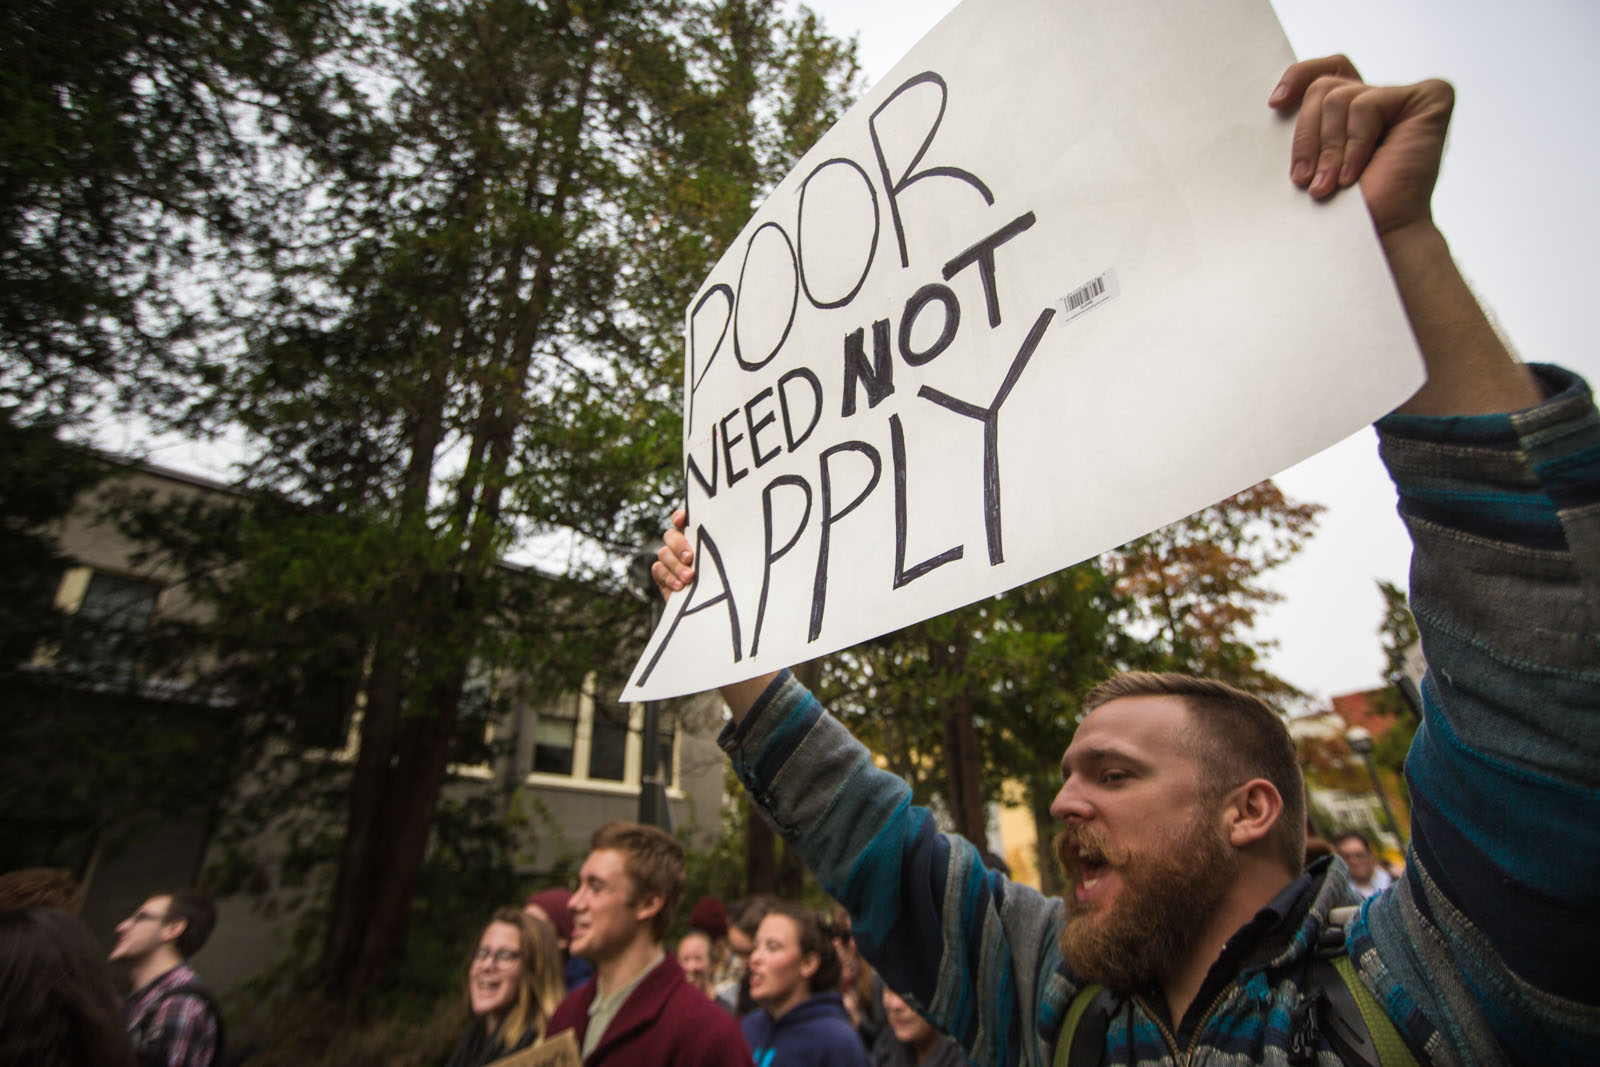 Rob Morton, founder of The Party Calendar, at a protest against tuition hikes on campus in fall 2014.